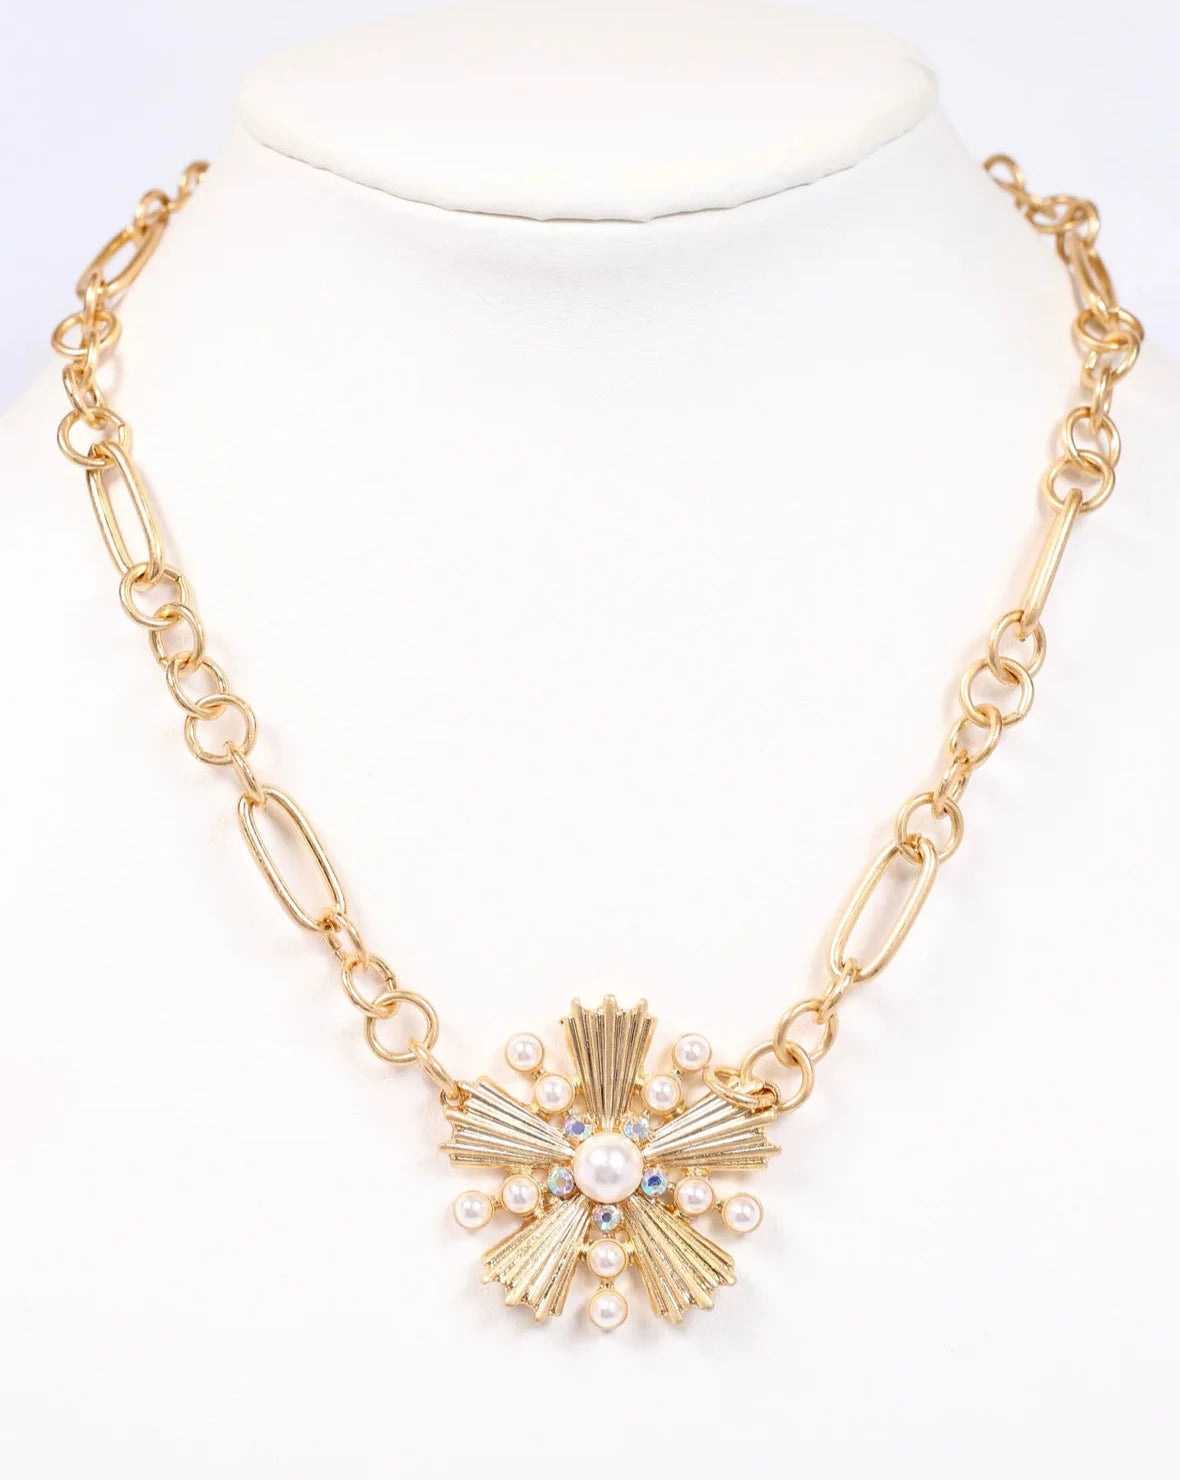 Kensington Embellished Metal Necklace Gold-Necklaces-Caroline Hill-LouisGeorge Boutique, Women’s Fashion Boutique Located in Trussville, Alabama